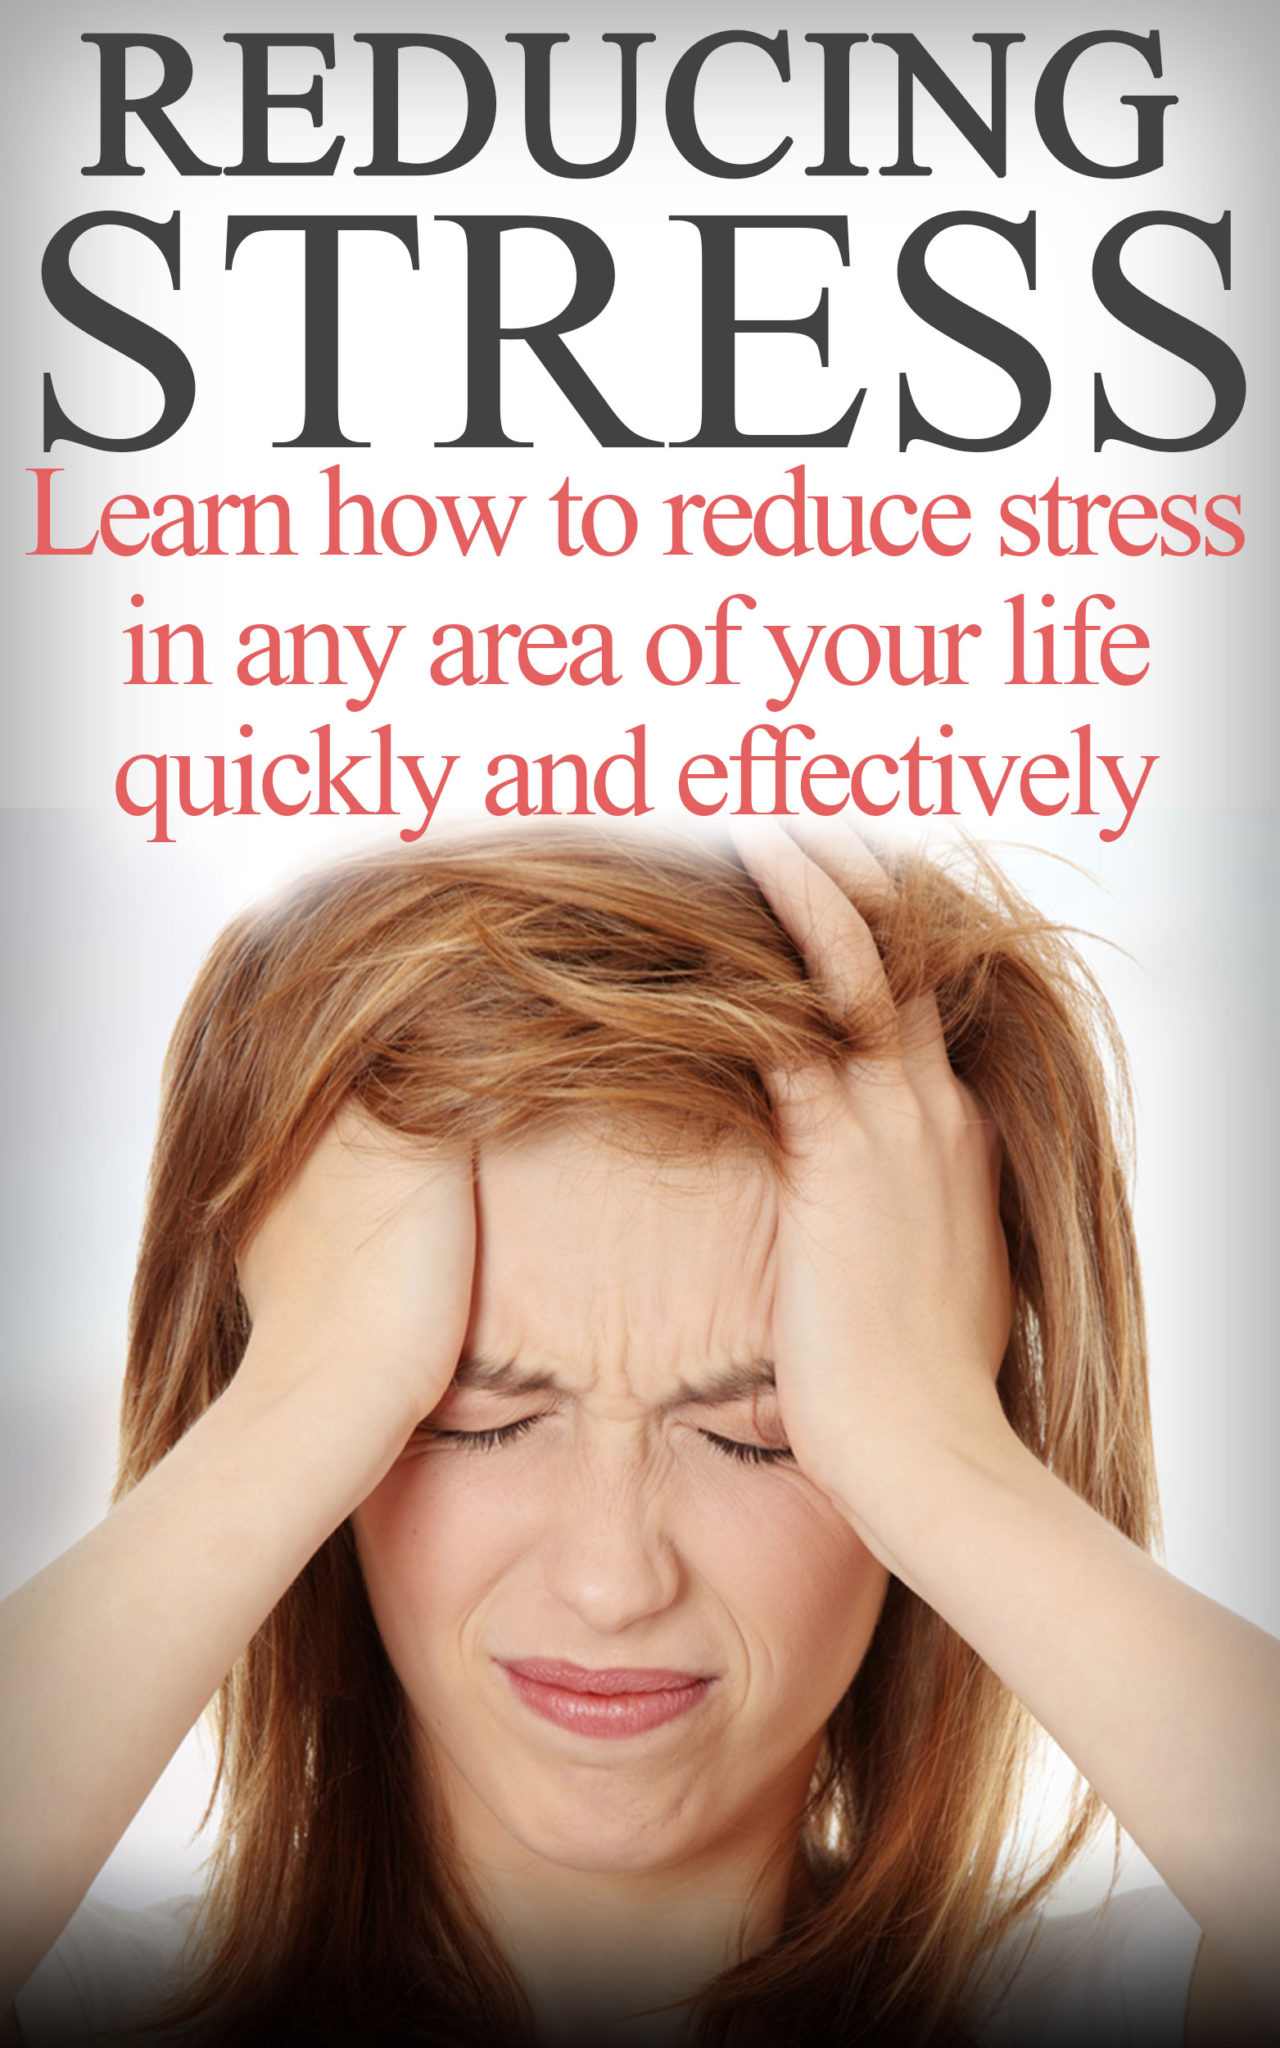 Reducing Stress- Learn How To Reduce Stress In any Area Of Your Life Quickly And Effectively by Jeffrey Robin